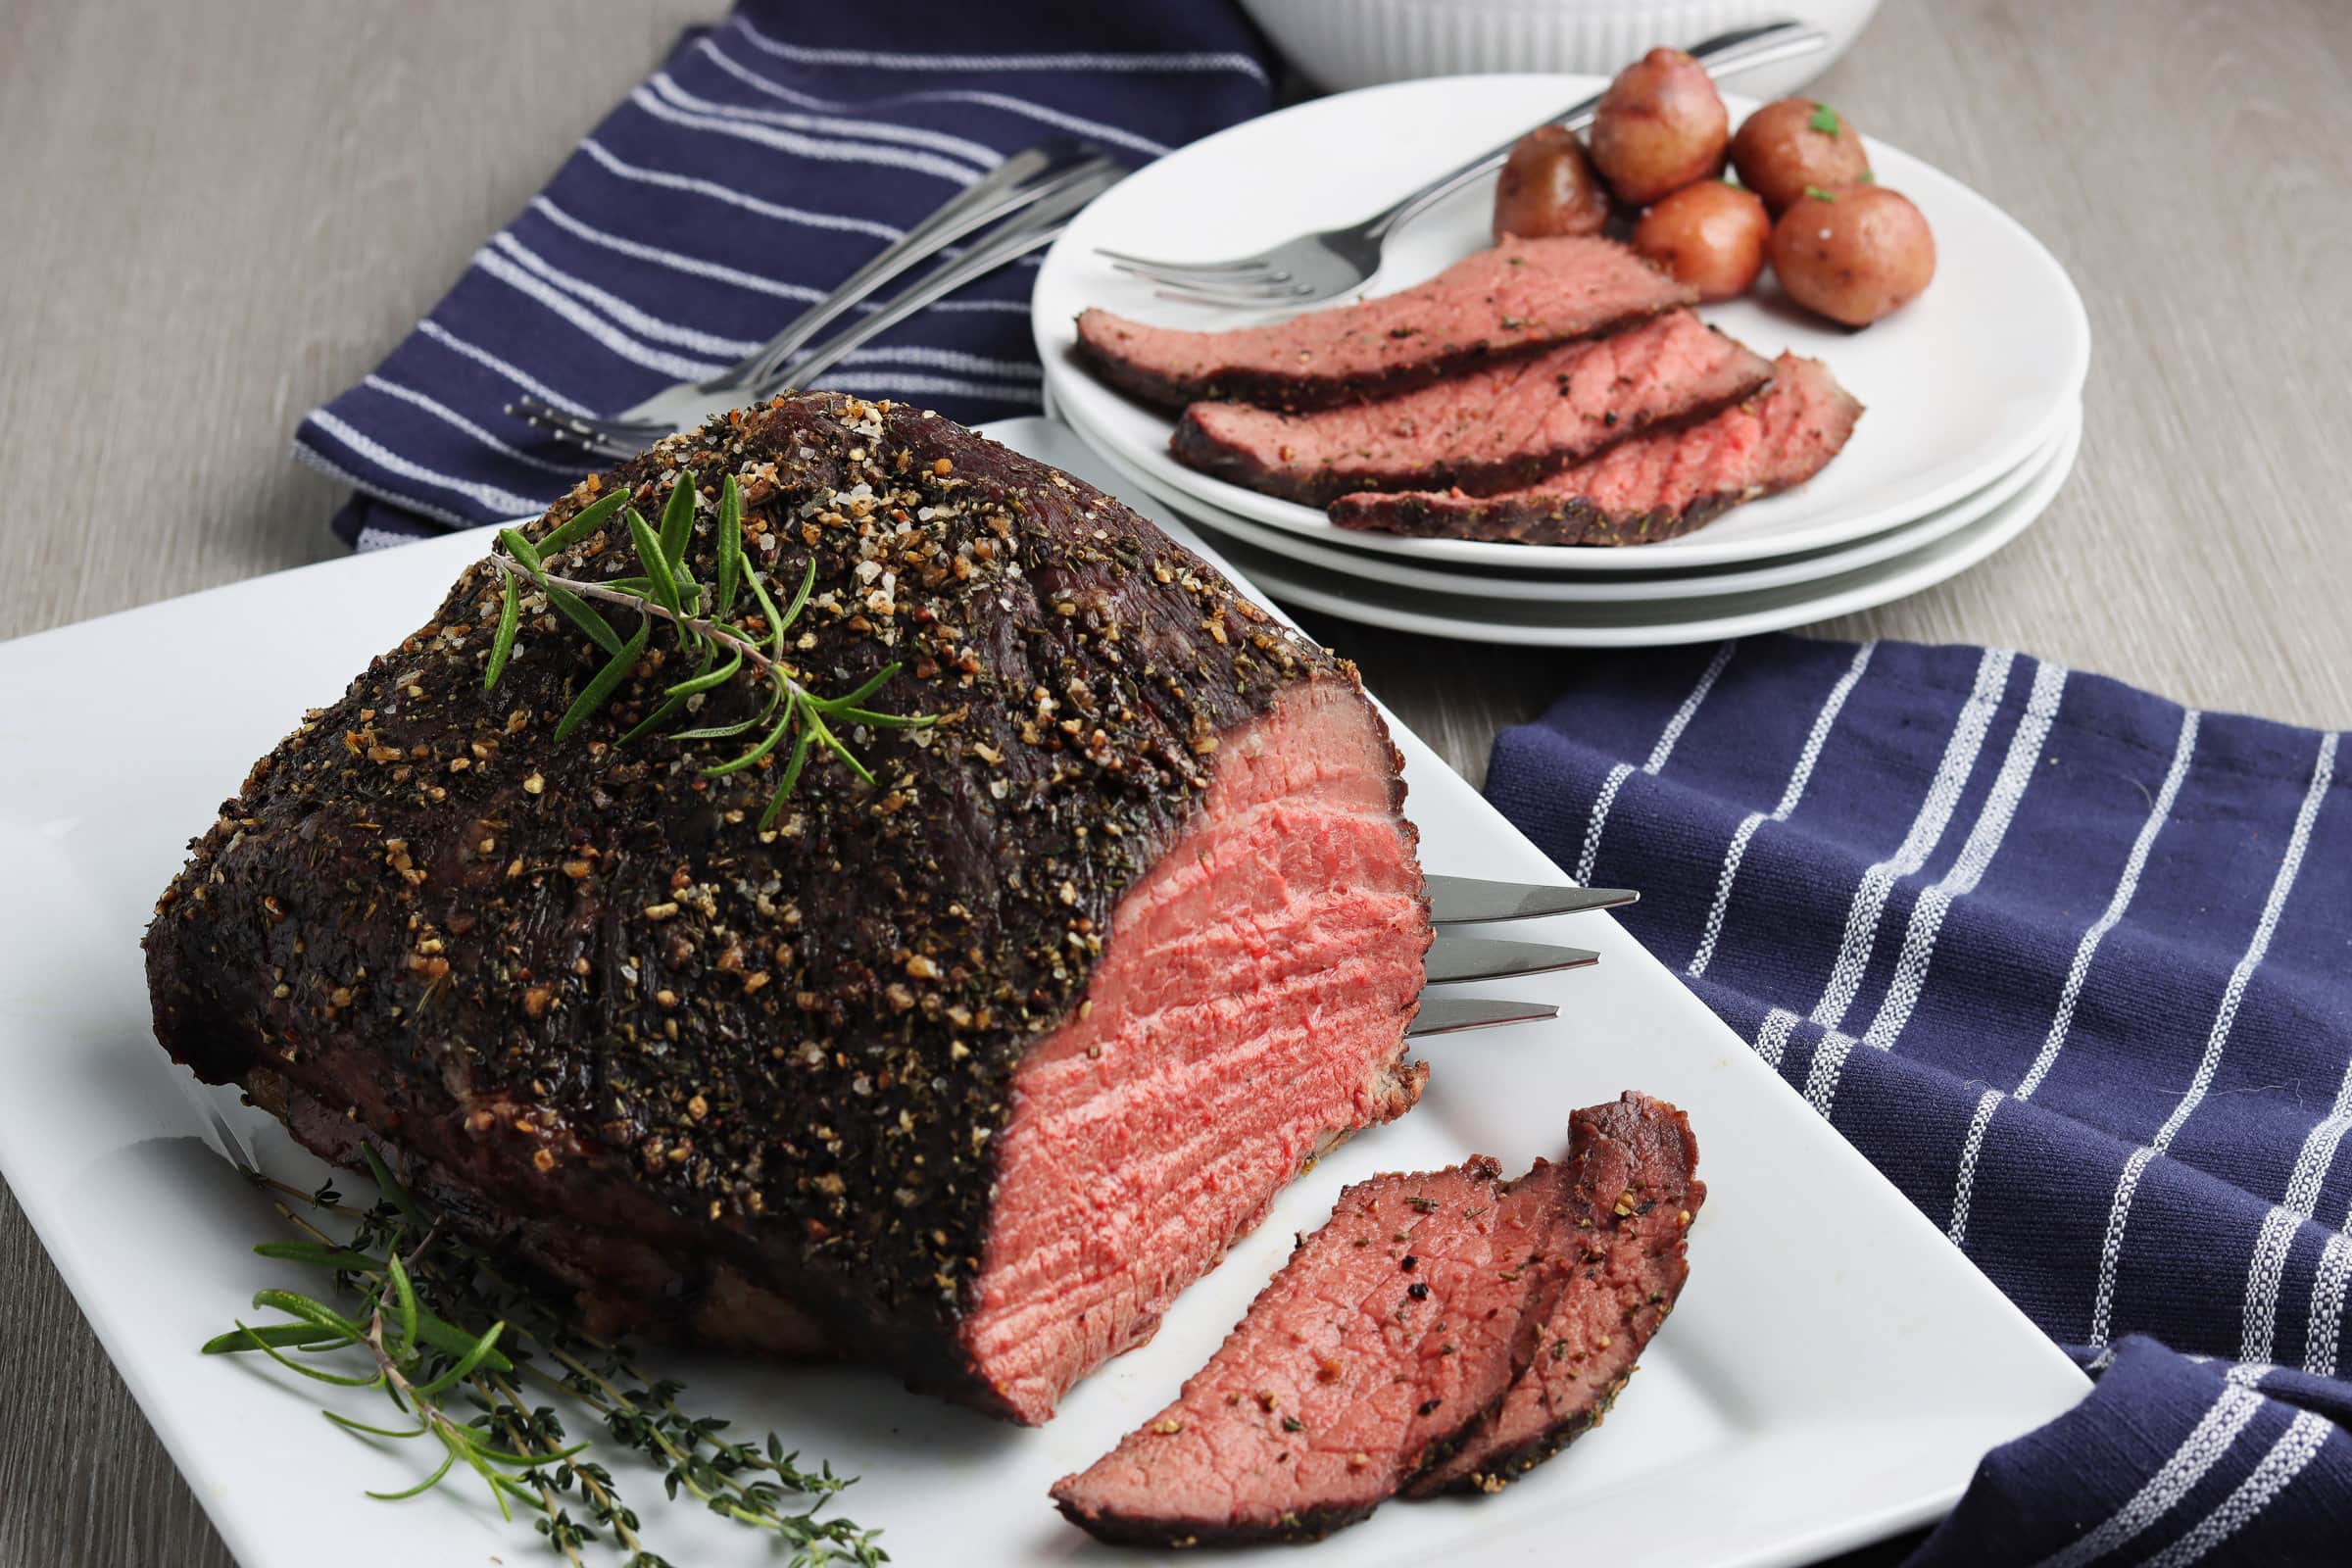 How to cook rump roast in the oven.